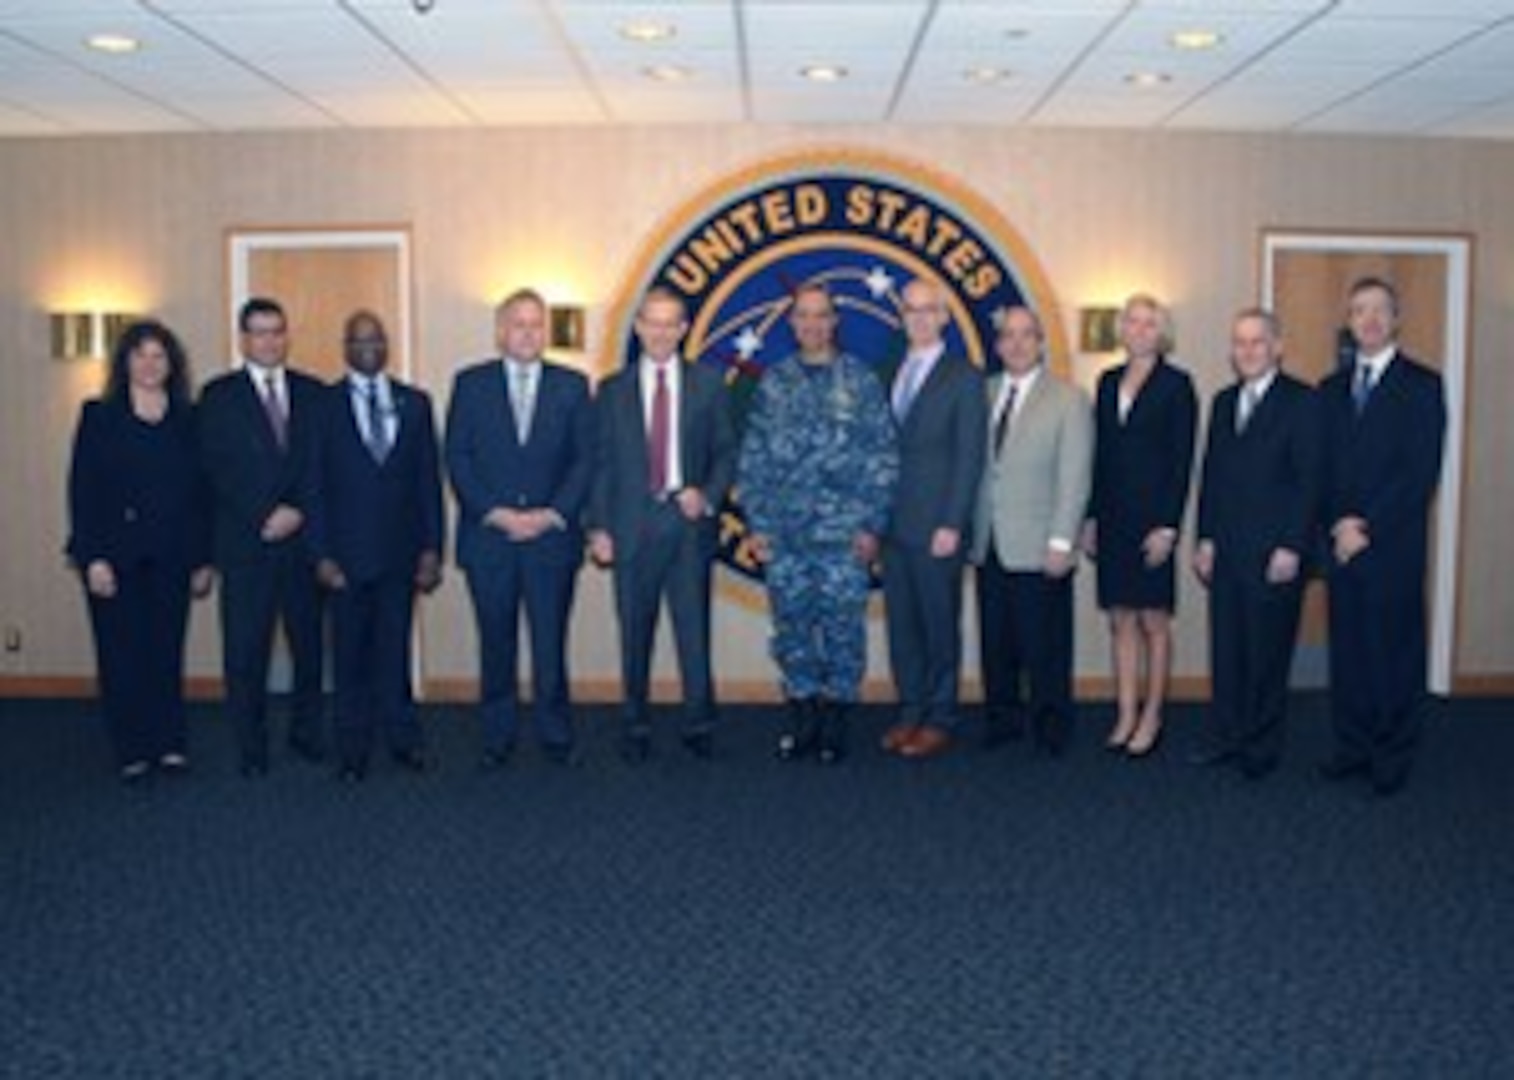 Senior leaders from six of the nation's 10 Federally Funded Research and Development Centers (FFRDC) and three of the 14 University Affiliated Research Centers (UARC) meet with Adm. Cecil D. Haney (center), U.S. Strategic Command commander, during their visit to USSTRATCOM headquarters at Offutt Air Force Base, Neb., Sept. 29, 2016. While here, leaders participated in roundtable discussions on projects and capabilities of their respective organizations. They also received briefings on USSTRATCOM challenges in the 21st century and toured the command's Global Operations Center. FFRDCs and UARCs serve as strategic partners that assist the government with systems engineering and integration, research and development, and study and analysis. (USSTRATCOM photo by Steve Cunningham)